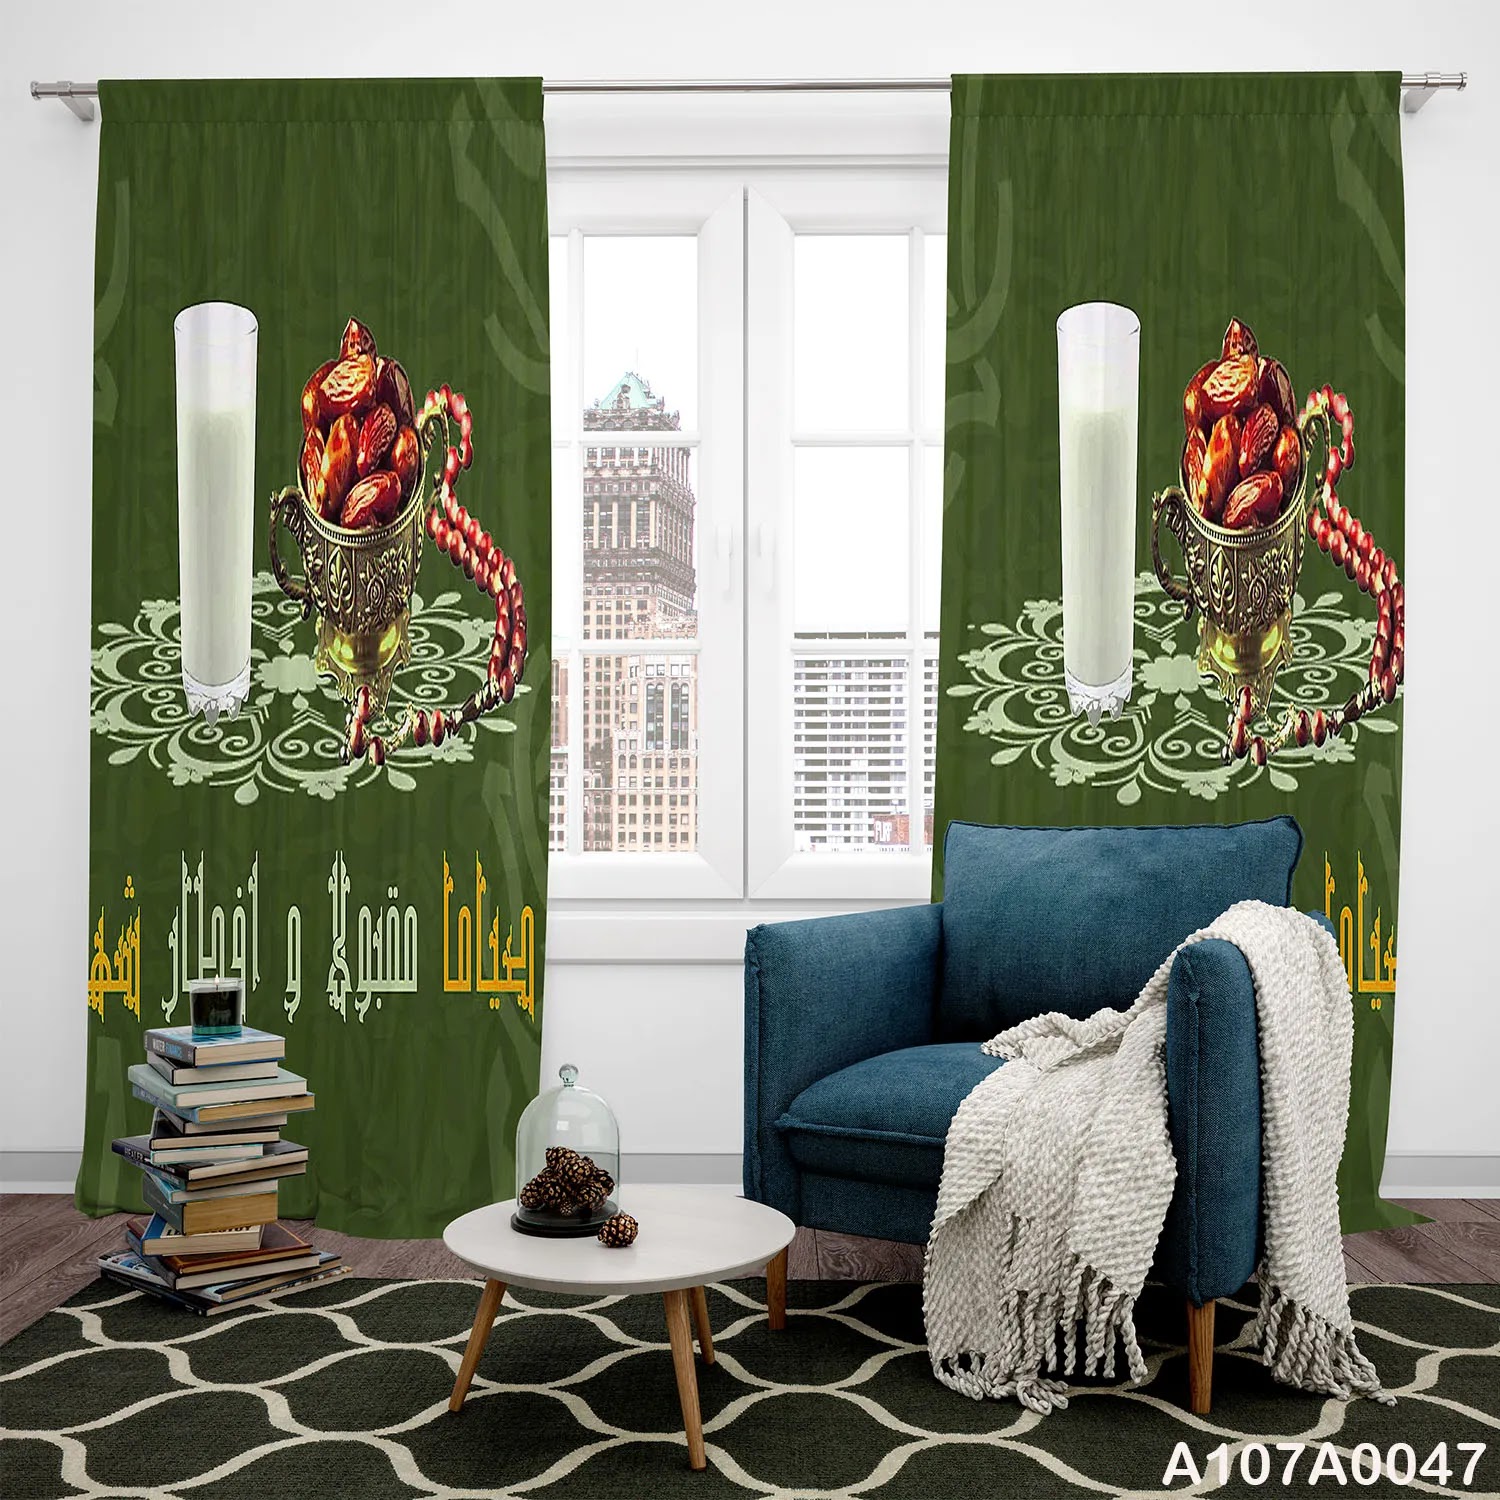 Curtains with "Accepted fasting" and green color